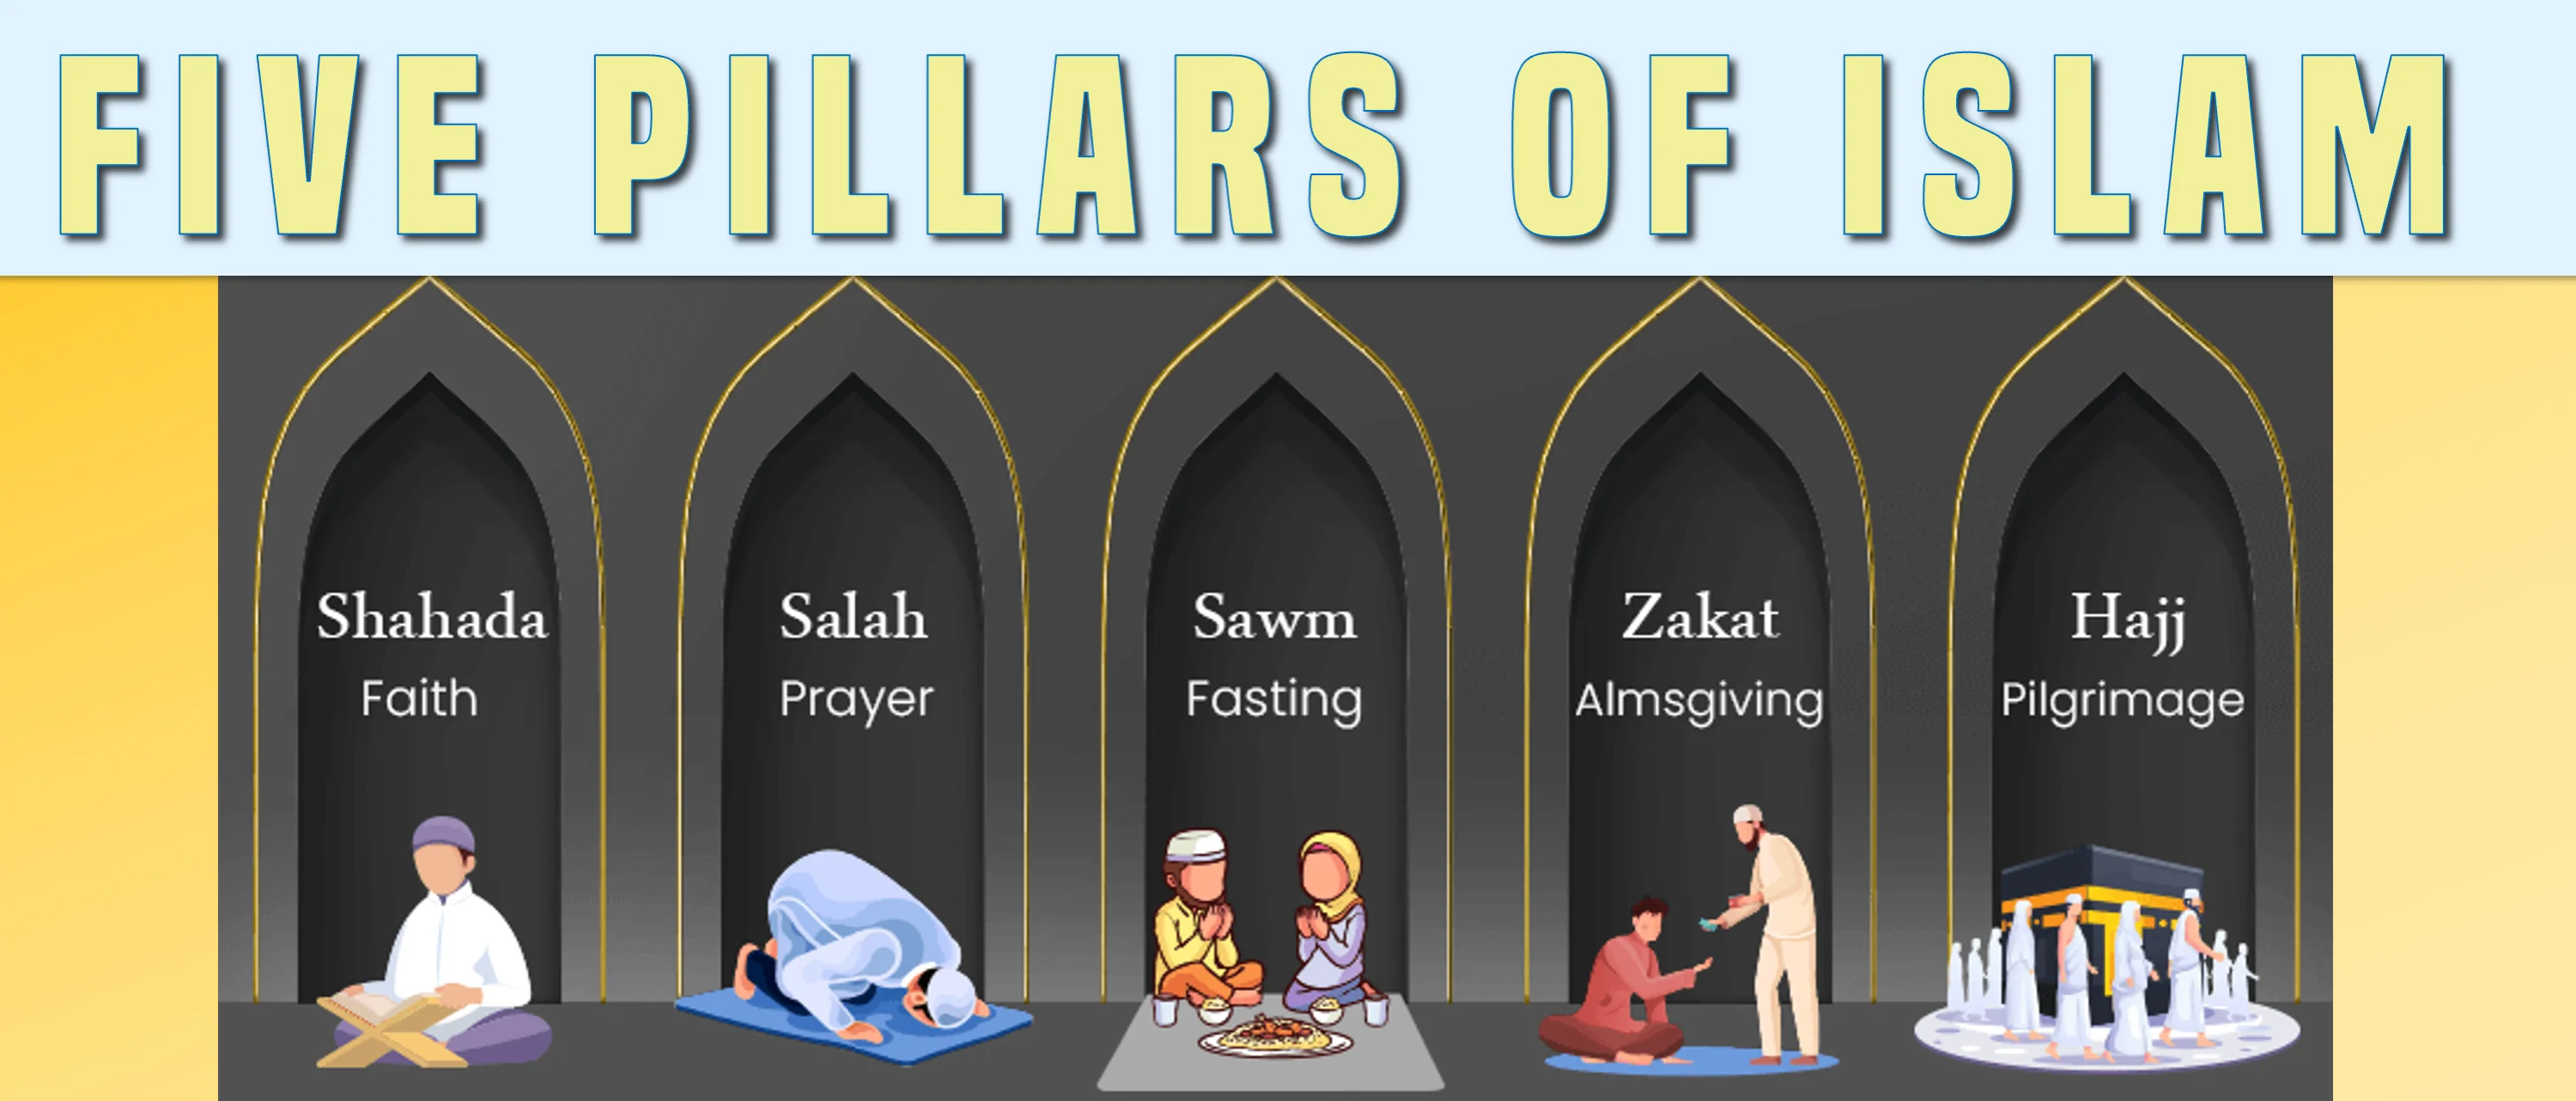 It illustrates the five pillars of islam which include shahadah (faith), salah (prayer), sawm (fasting), zakat (almsgiving) and hajj (pilgrimage). It shows how these five components build the foundation of Islam.